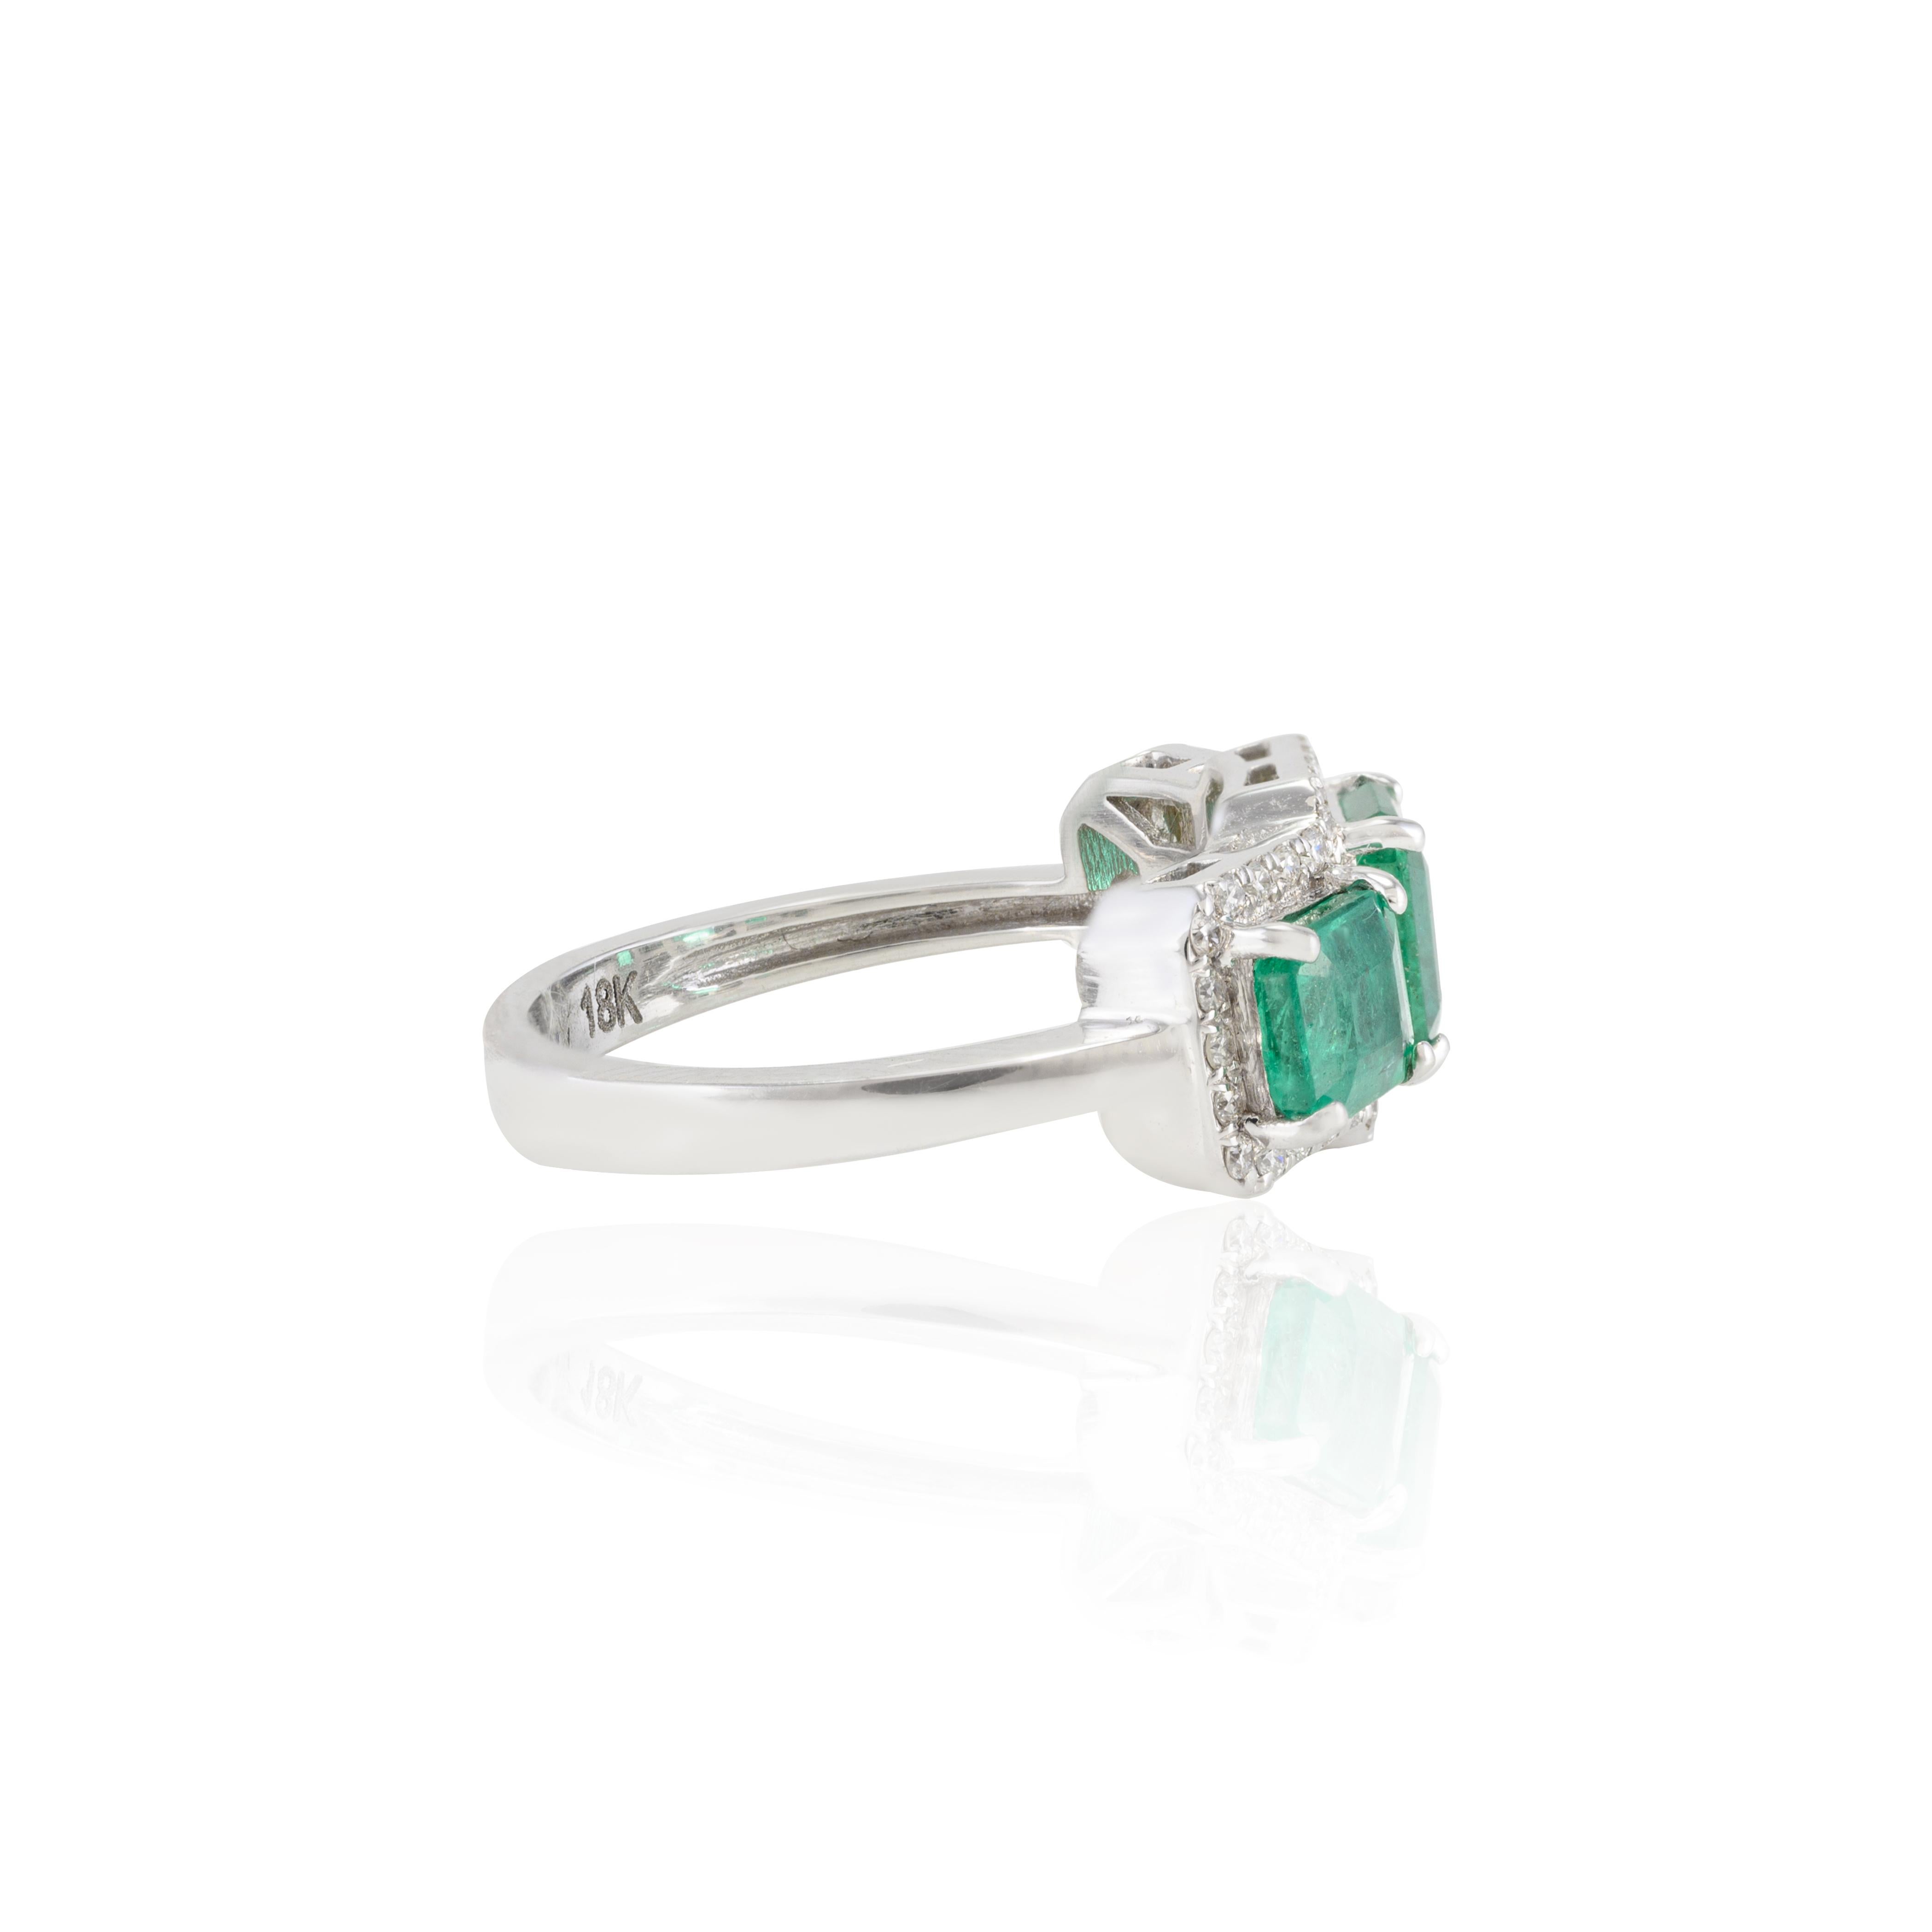 For Sale:  Three Stone Genuine Emerald Ring with Halo Diamond in 18k Solid White Gold 5